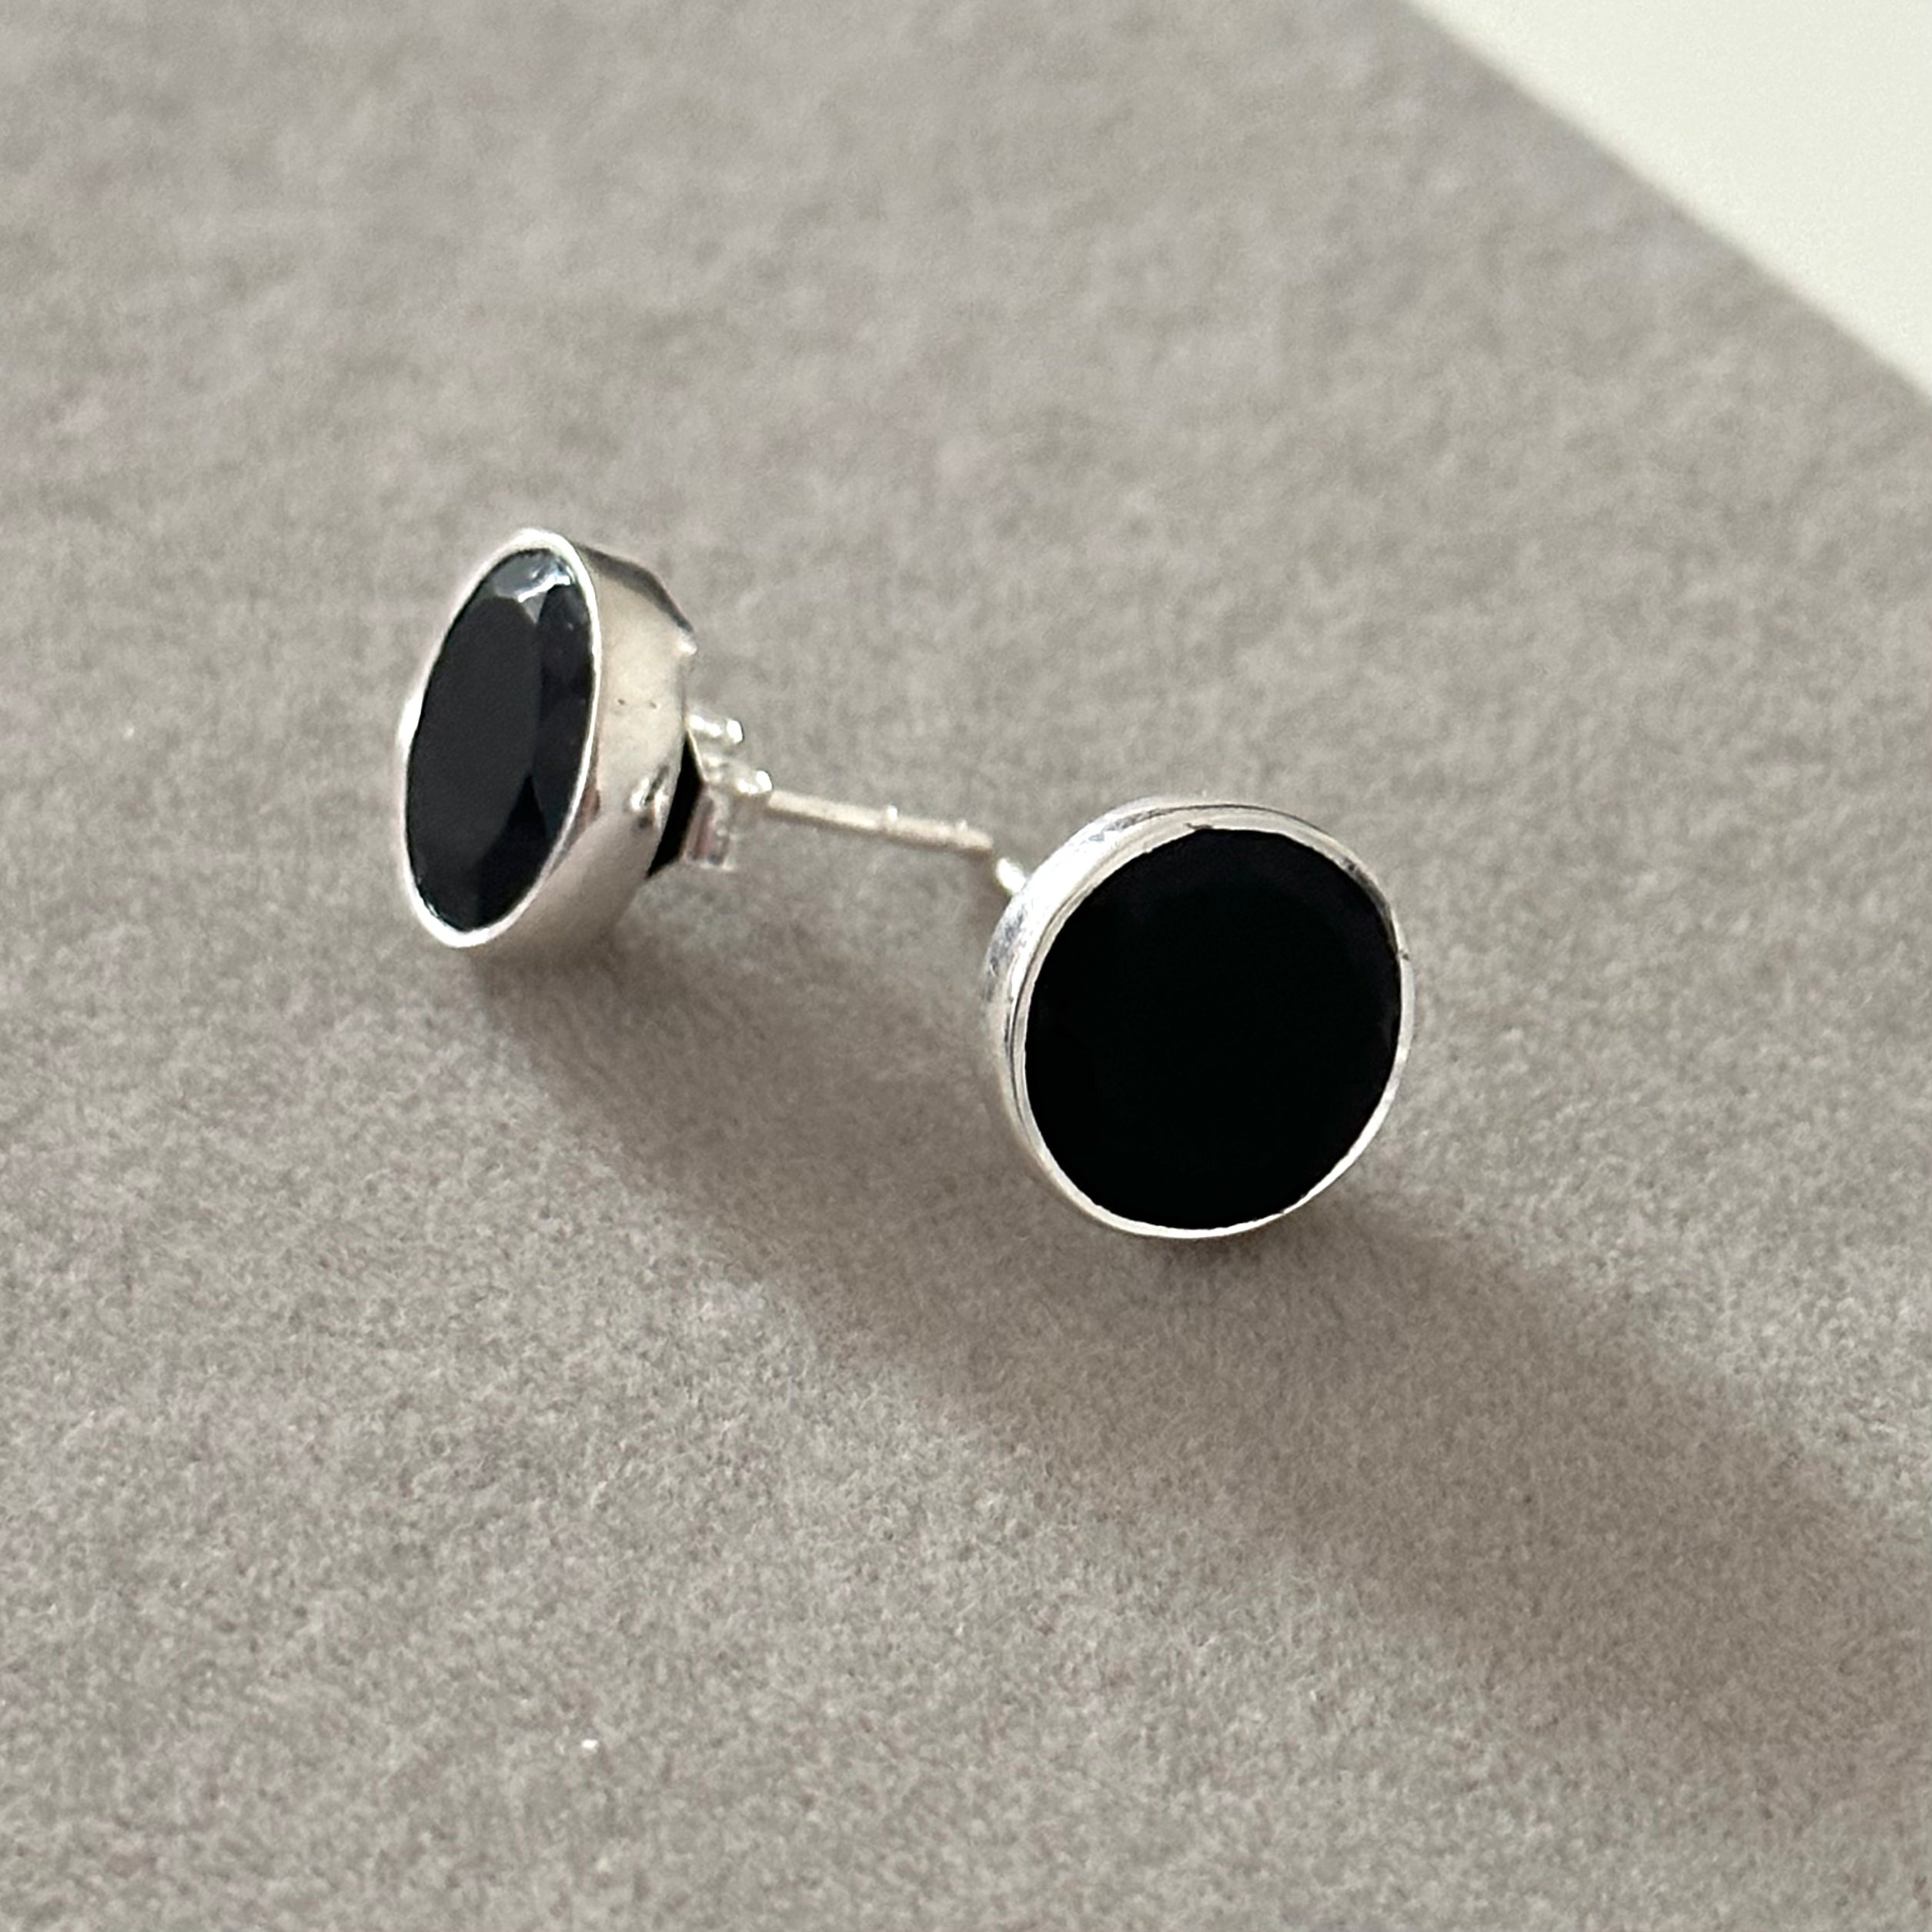 Black Onyx Studs in Sterling Silver with a Round Faceted Gemstone 